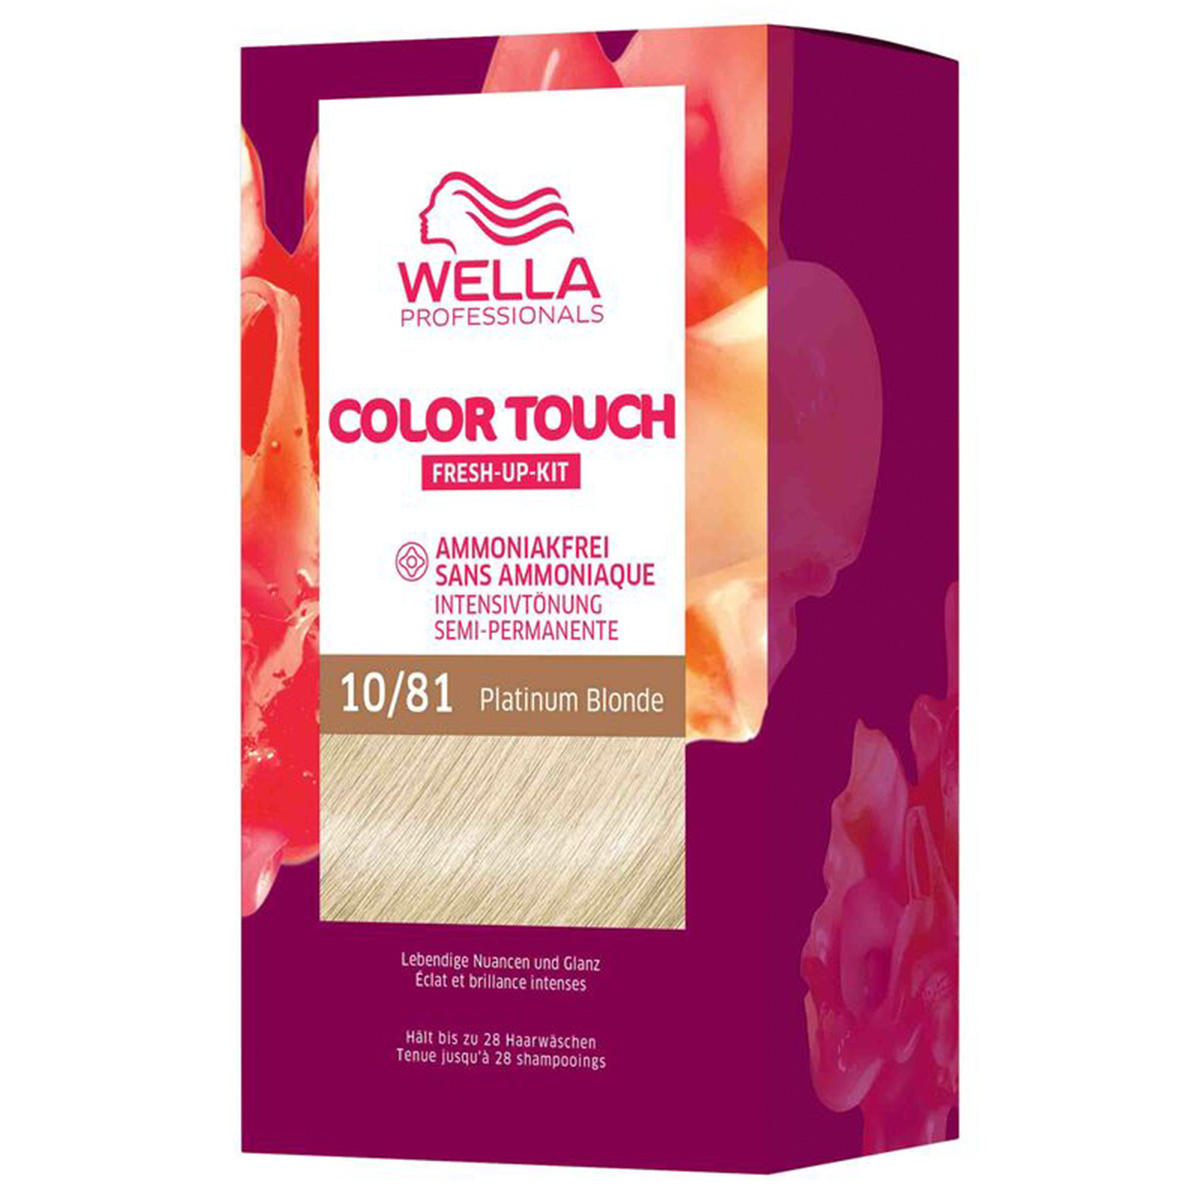 Wella Color Touch Fresh-Up-Kit  - 1